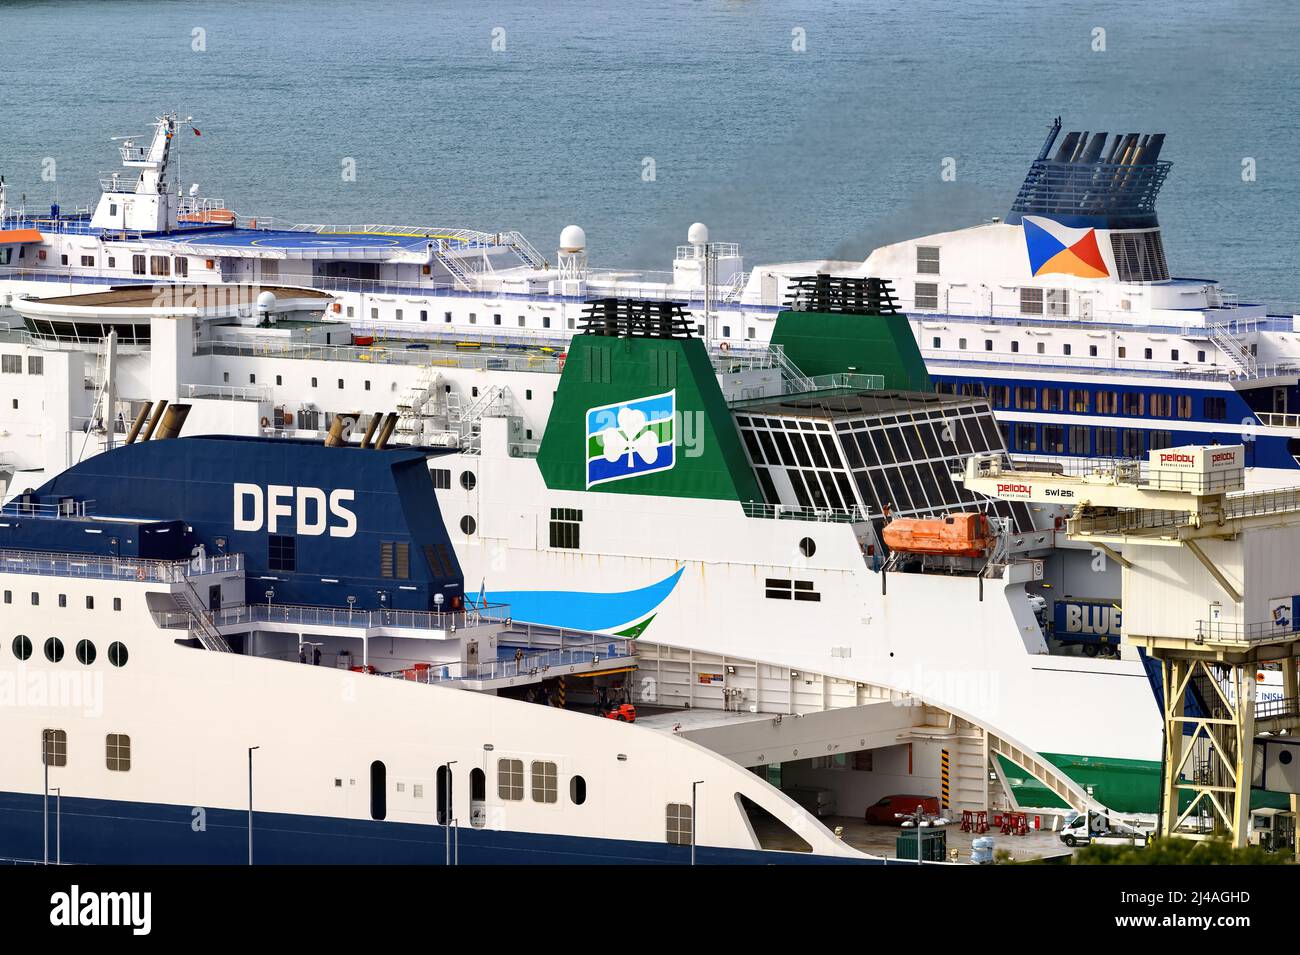 Brand logos on the funnels of the three cross-Channel ferry operators at the Port of Dover - DFDS, Irish Ferries and P&O Ferries - August 2021. Stock Photo